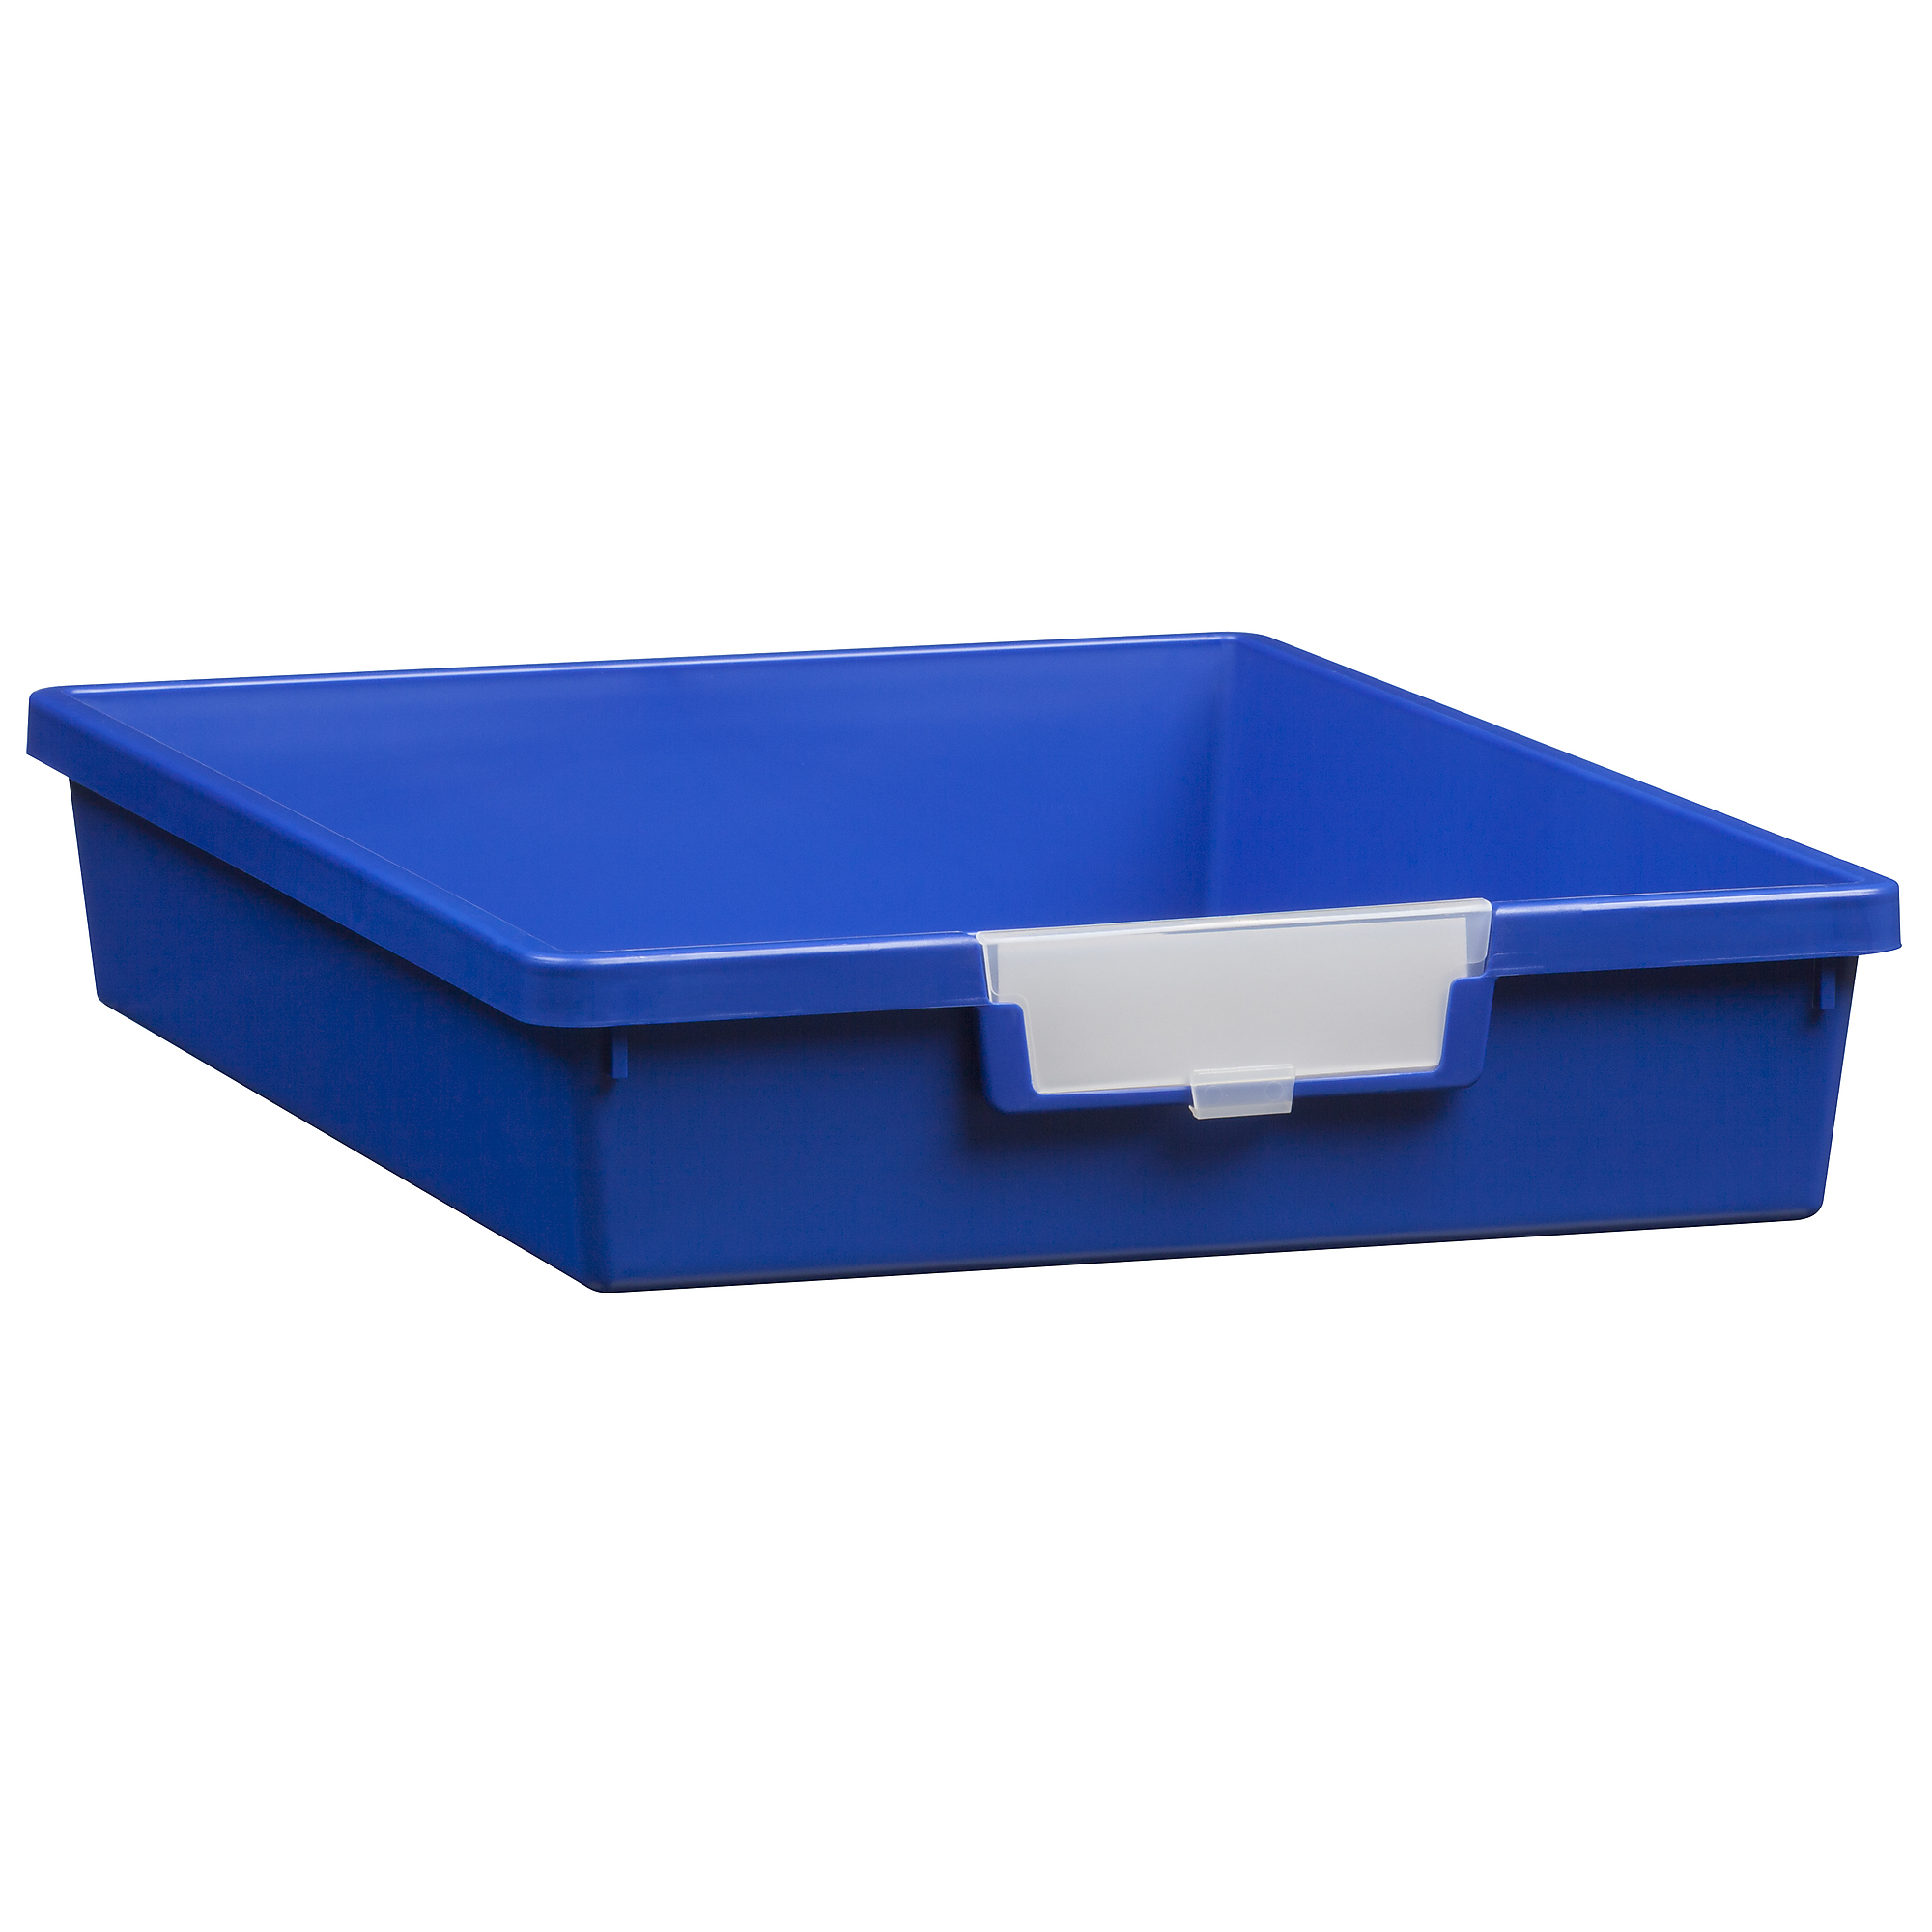 Certwood StorWerks, Slim Line 3Inch Tray in Primary Blue-1PK, Included (qty.) 1 Height 3 in, Model CE1950PB1